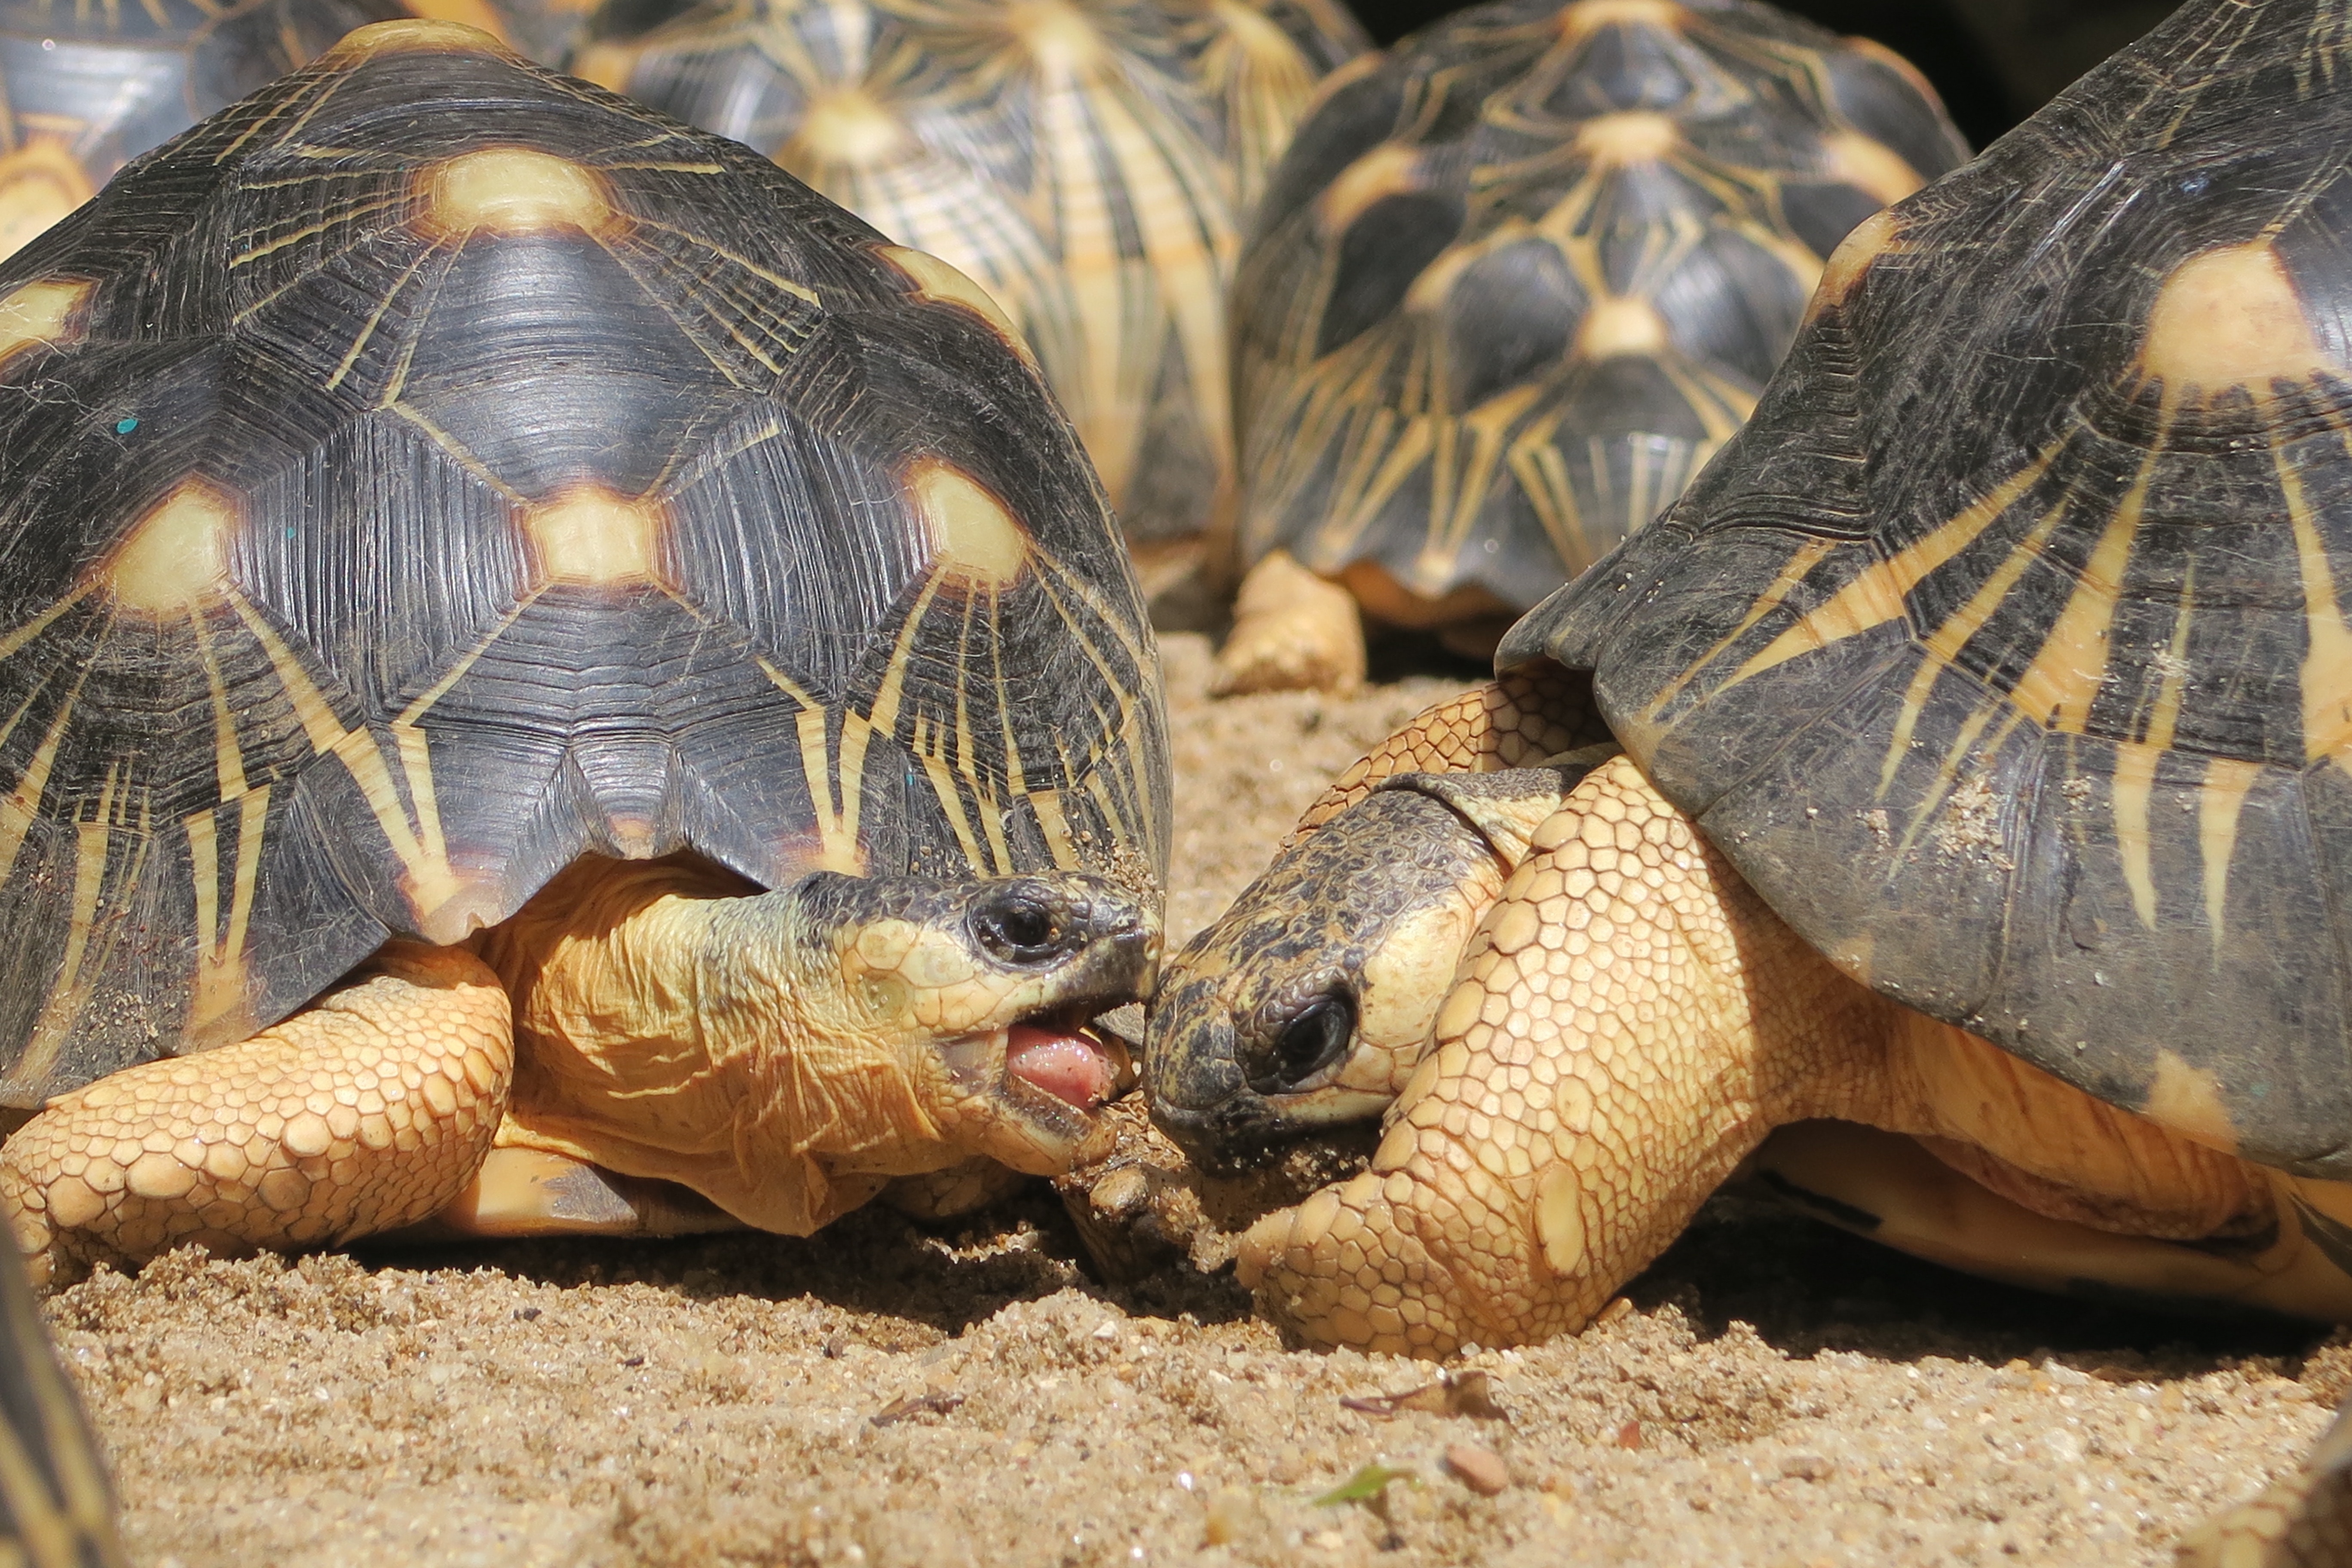 Two large turtles head to head. One has its mouth open and appears to be speaking into the ear of the other.